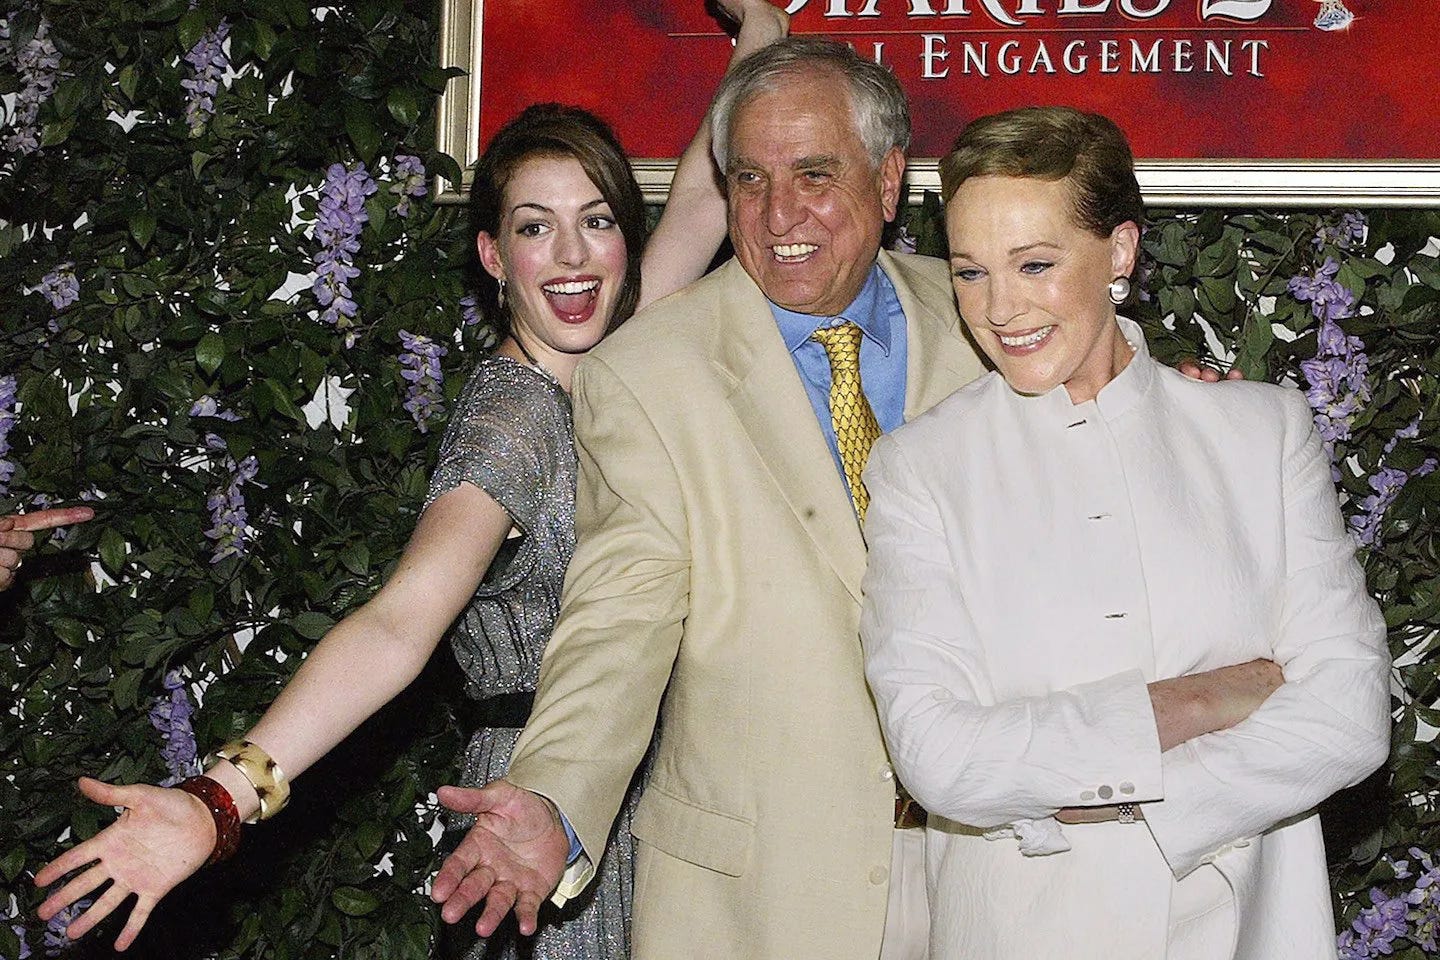 Anne Hathaway, Garry Marshall, and Julie Andrews at the red carpet premiere of The Princess Diaries 2: Royal Engagement.